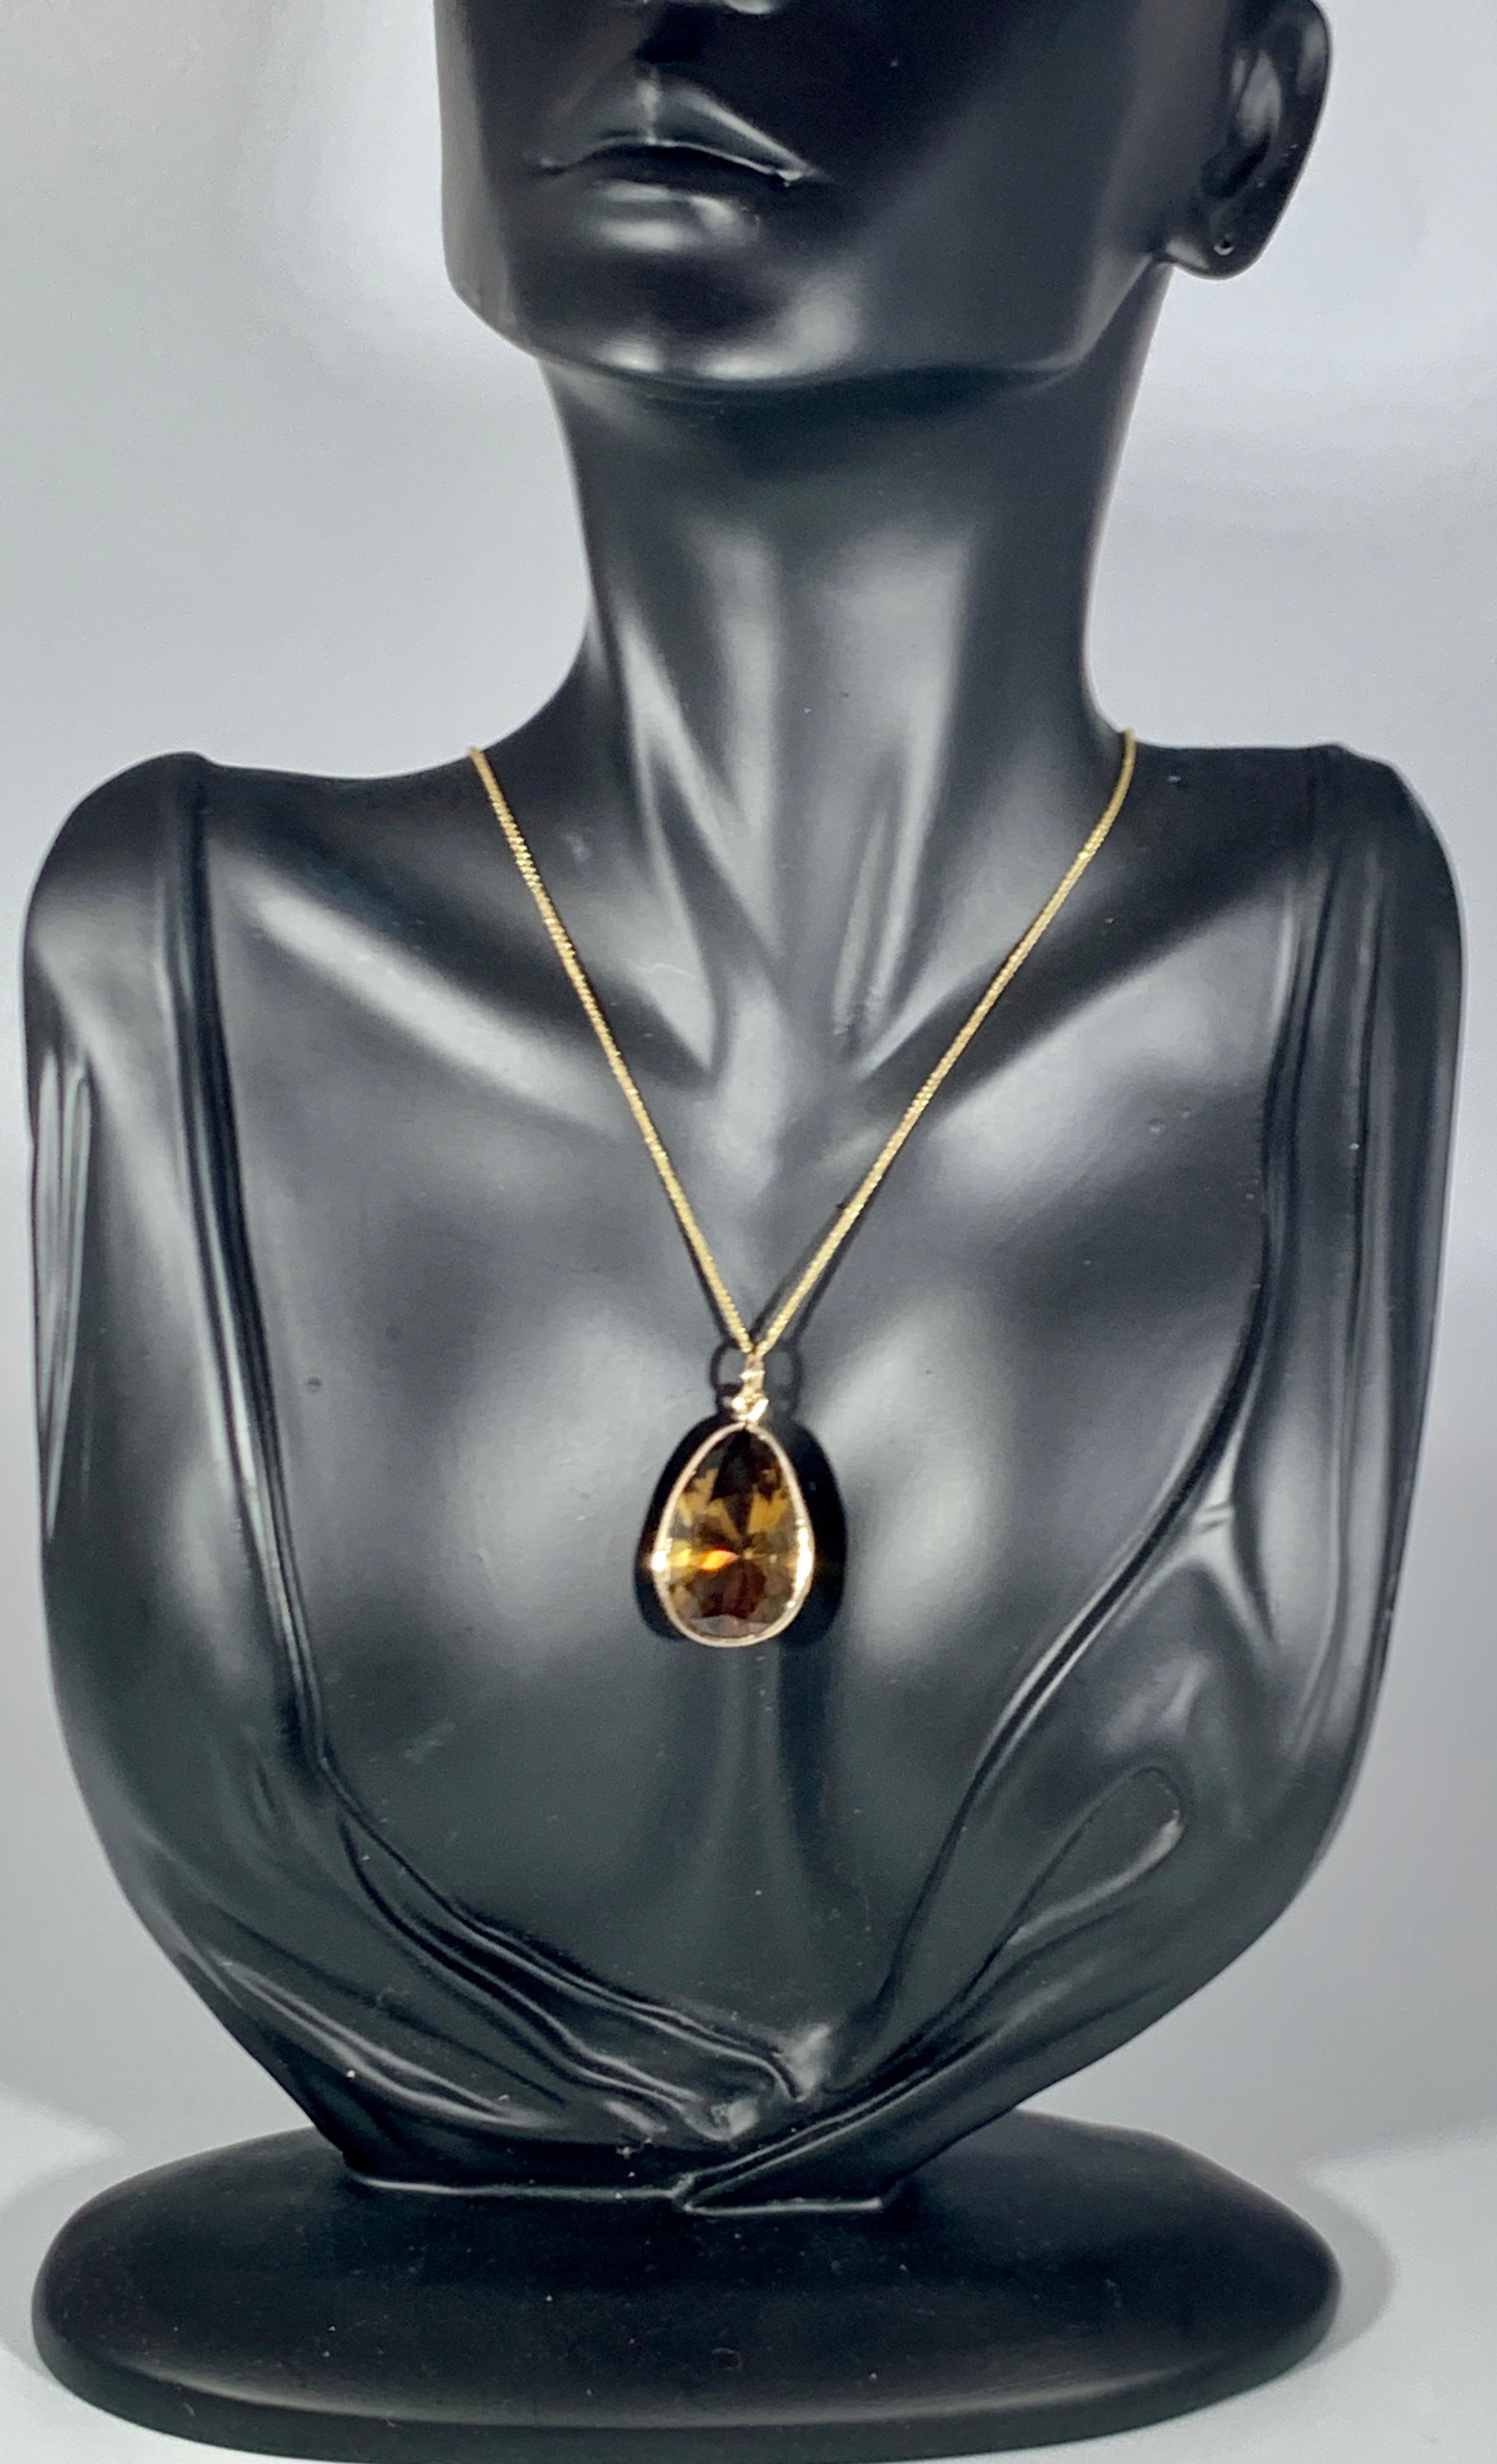 19 Carat Pear Shape Citrine Pendent or Necklace 14 Karat Yellow Gold with Chain 5